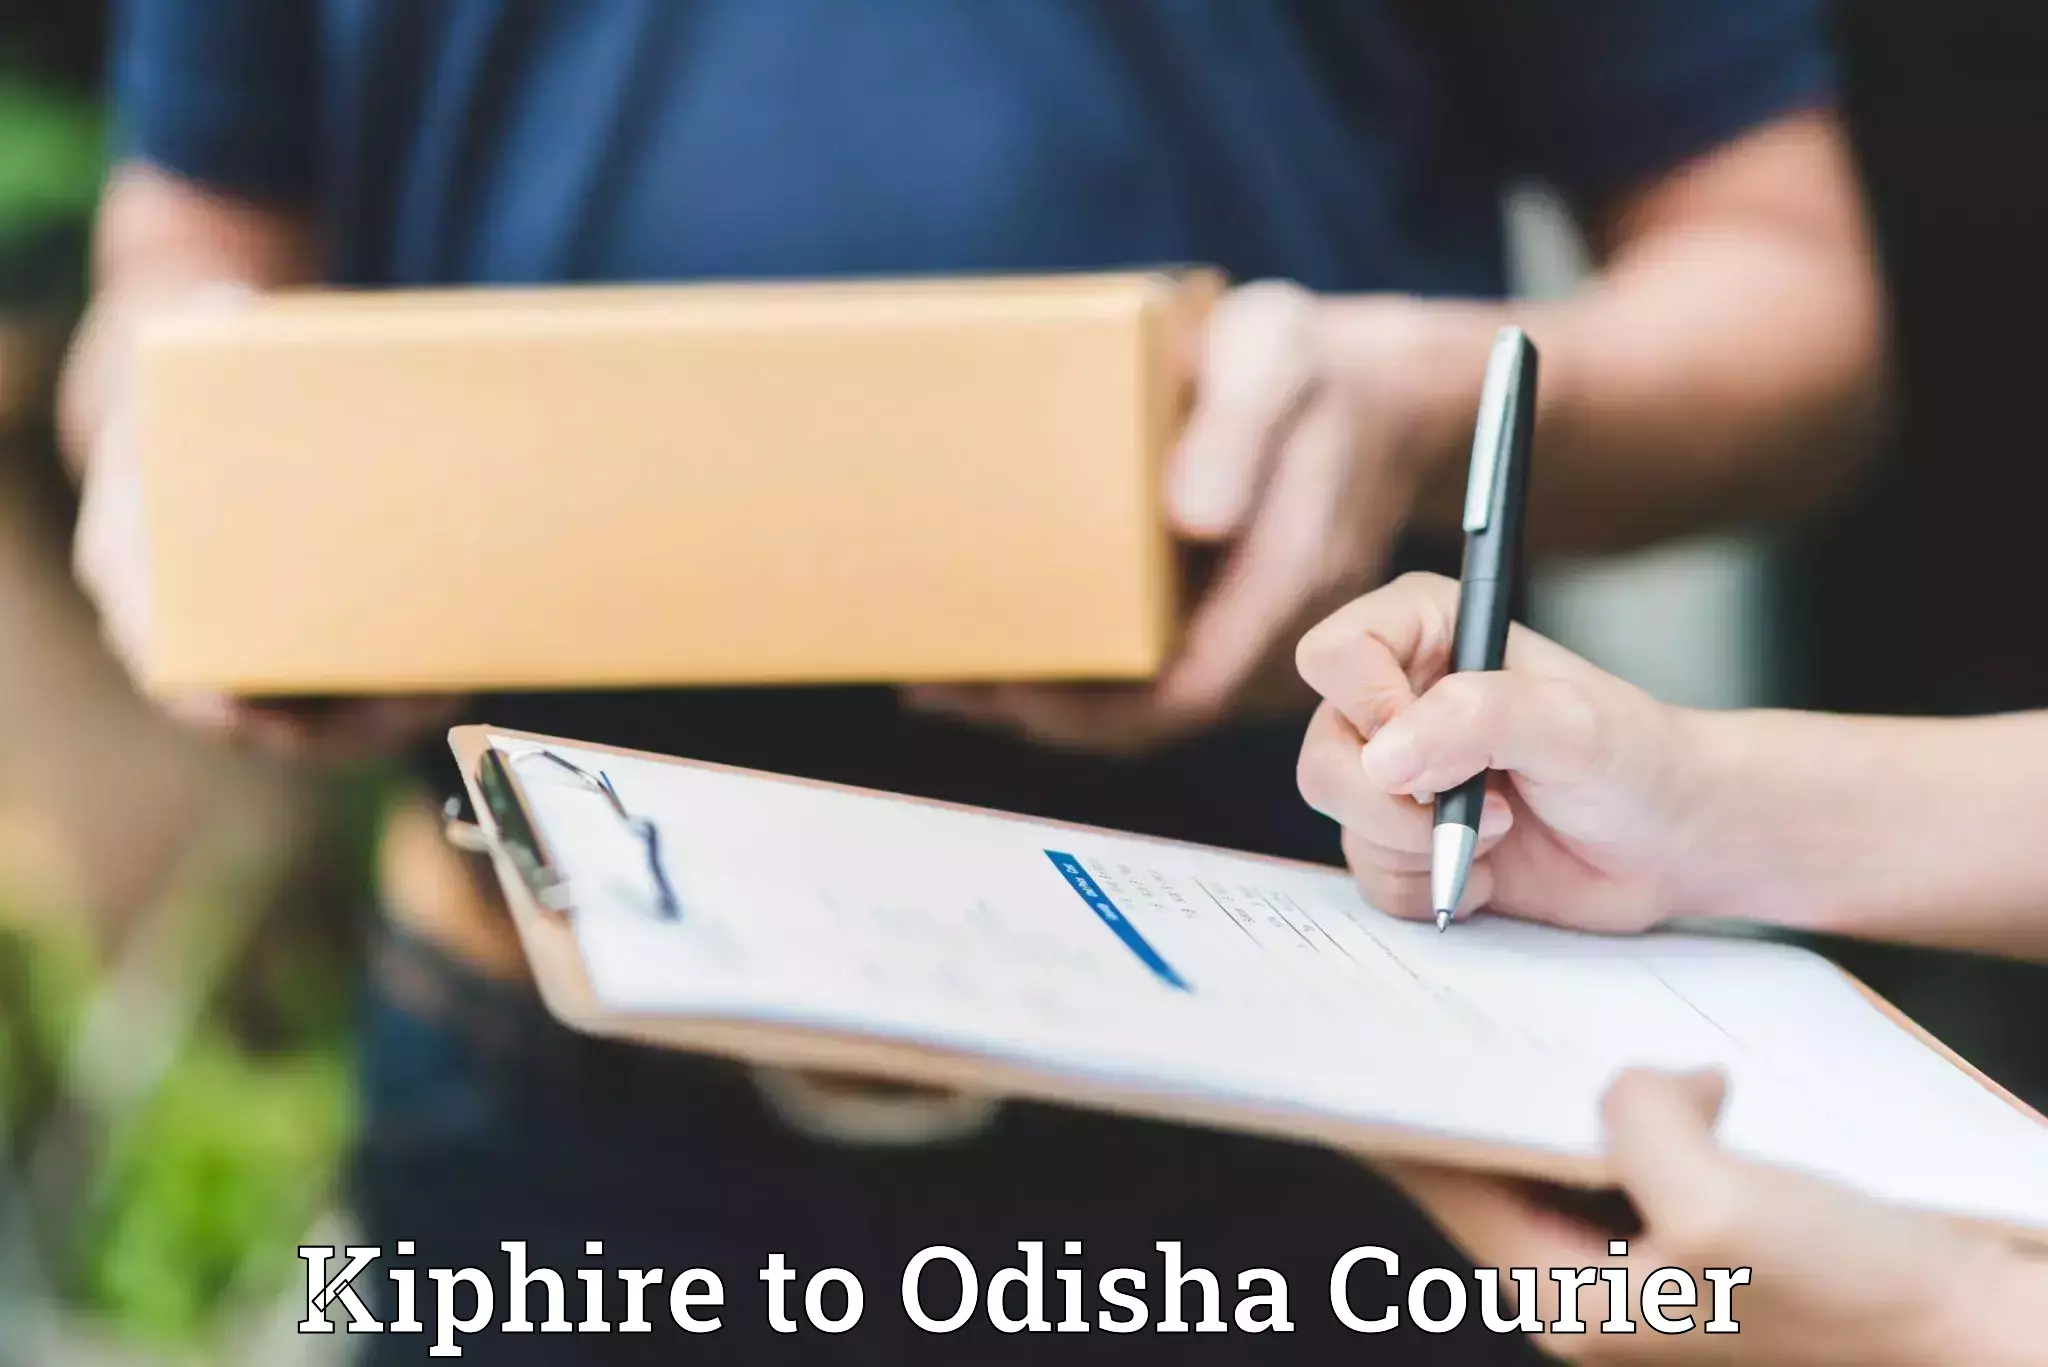 Efficient relocation services Kiphire to Odisha